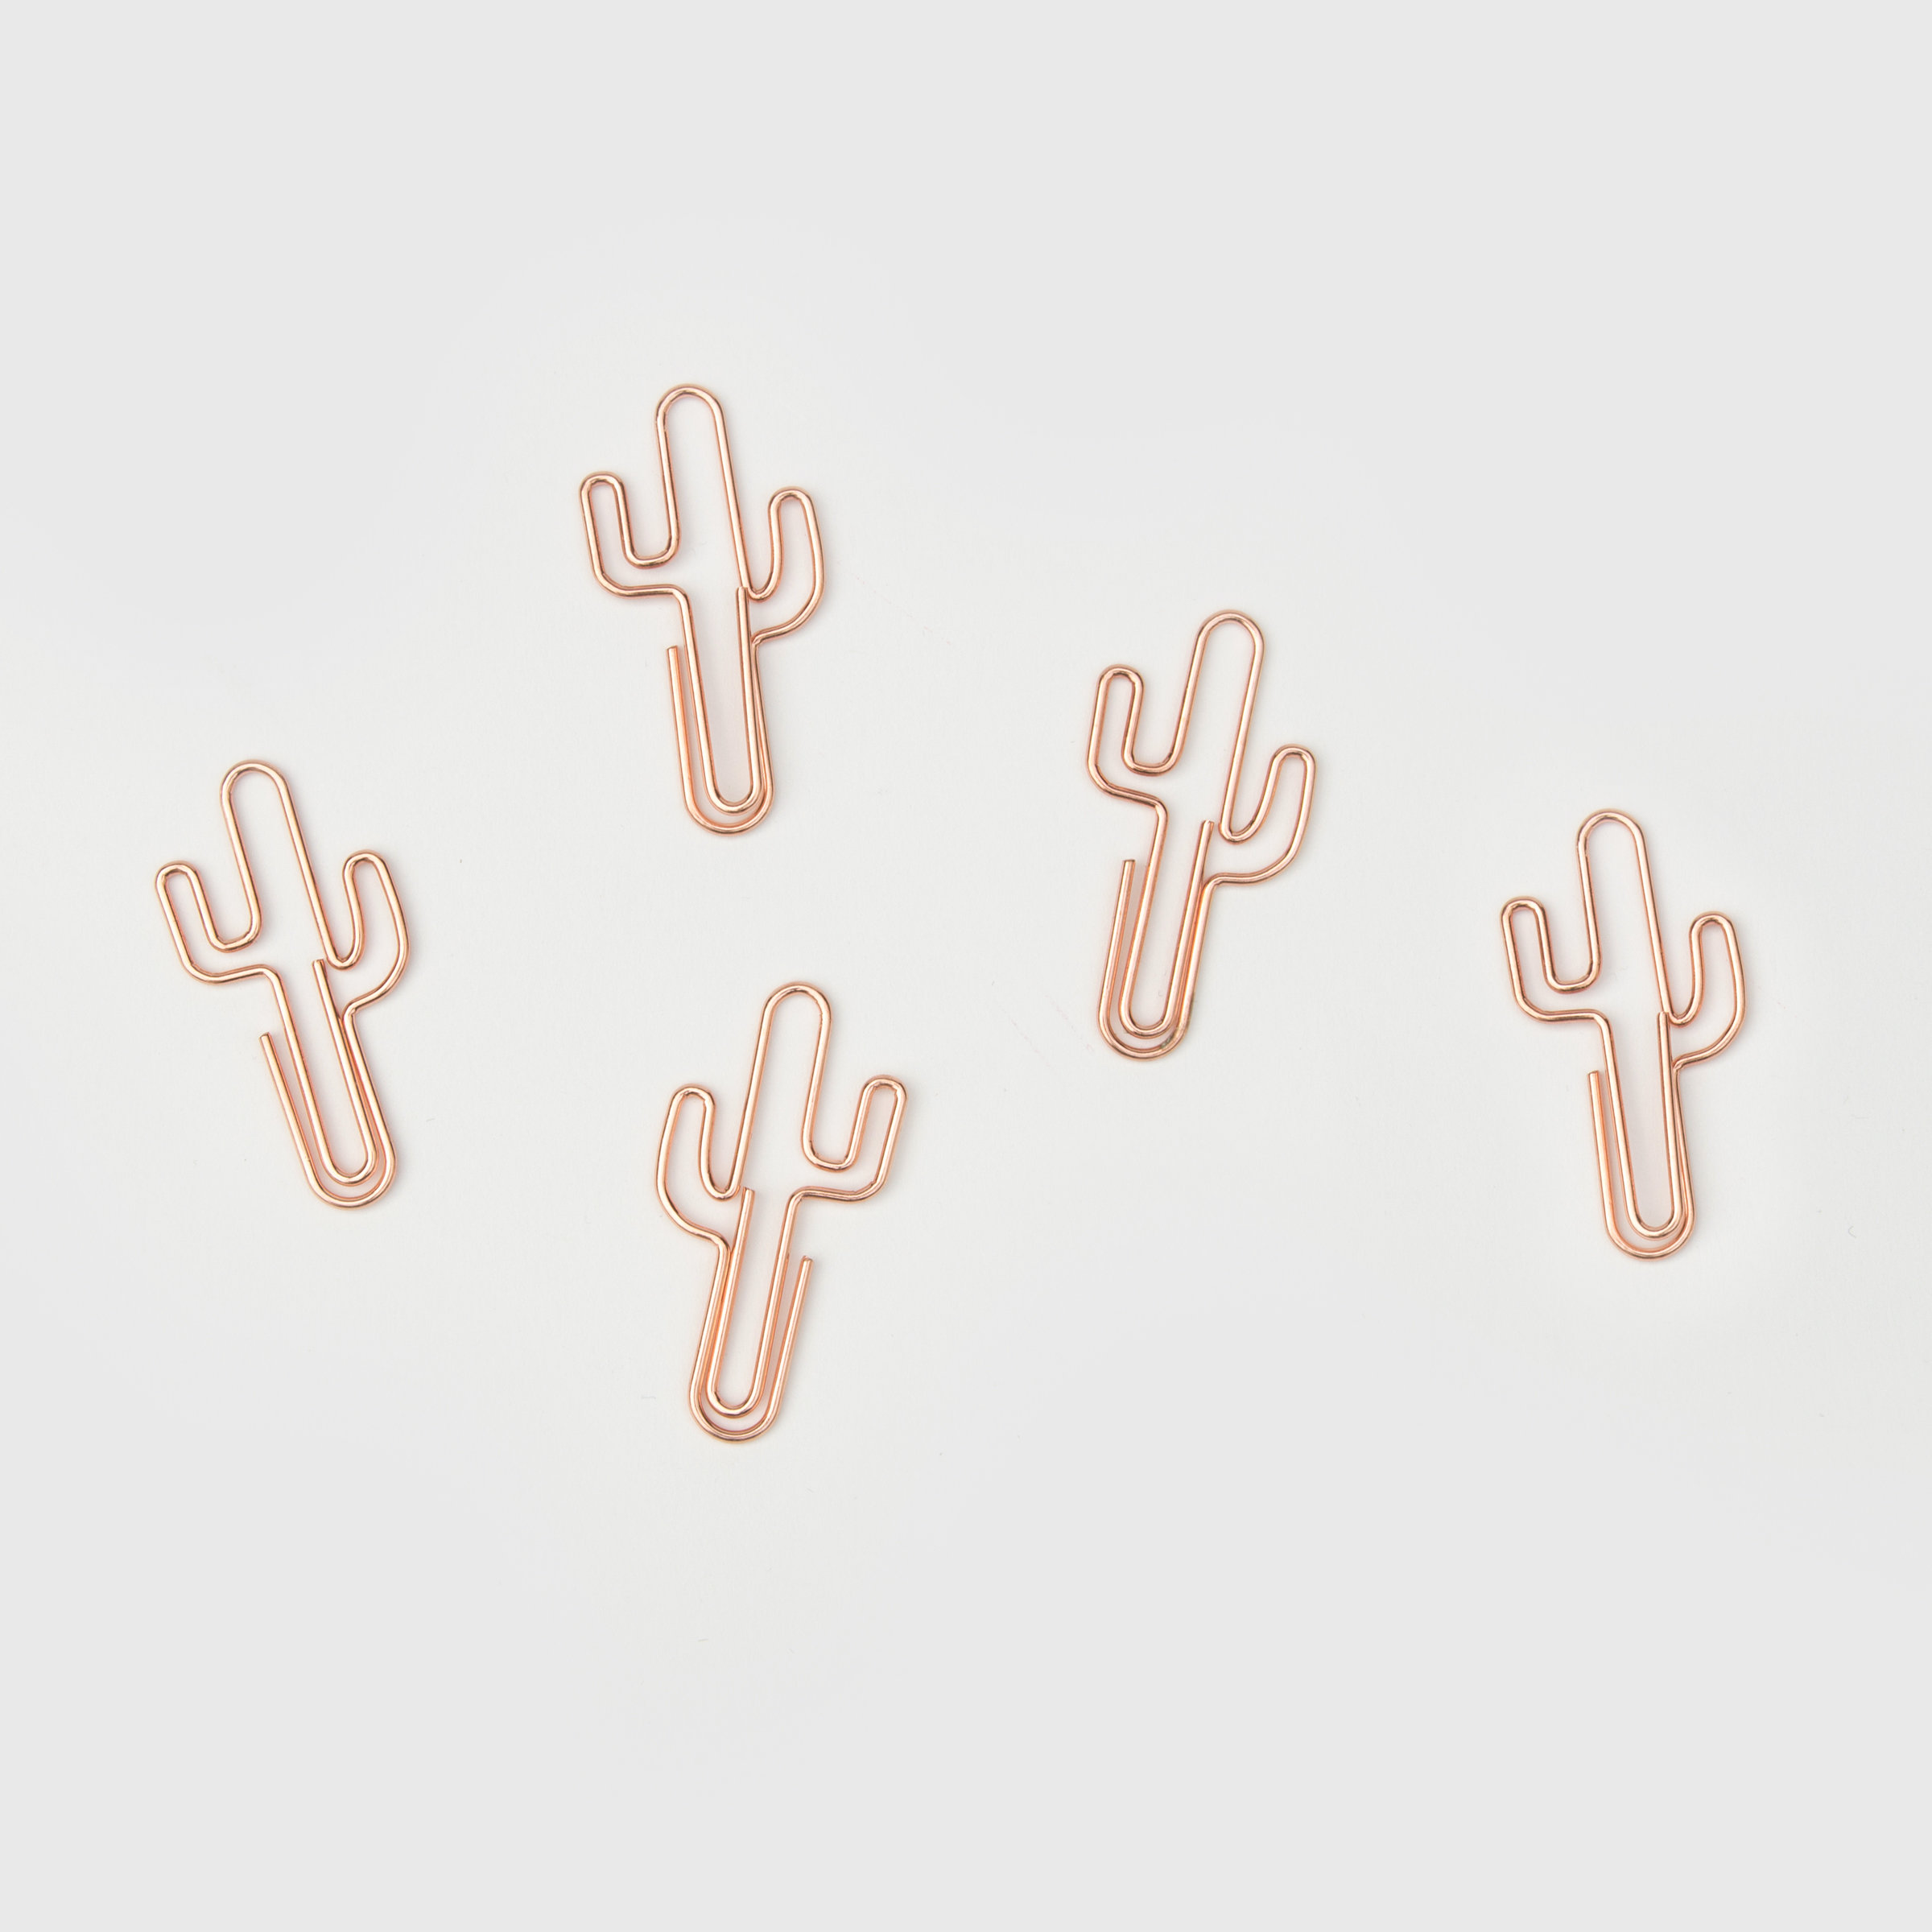 OUTU Big Size 20pcs/Box Green/Gold Cactus Shape Paper Clips Funny Kawaii Bookmark Office School Stationery Marking Clips H0117 Gold 2 